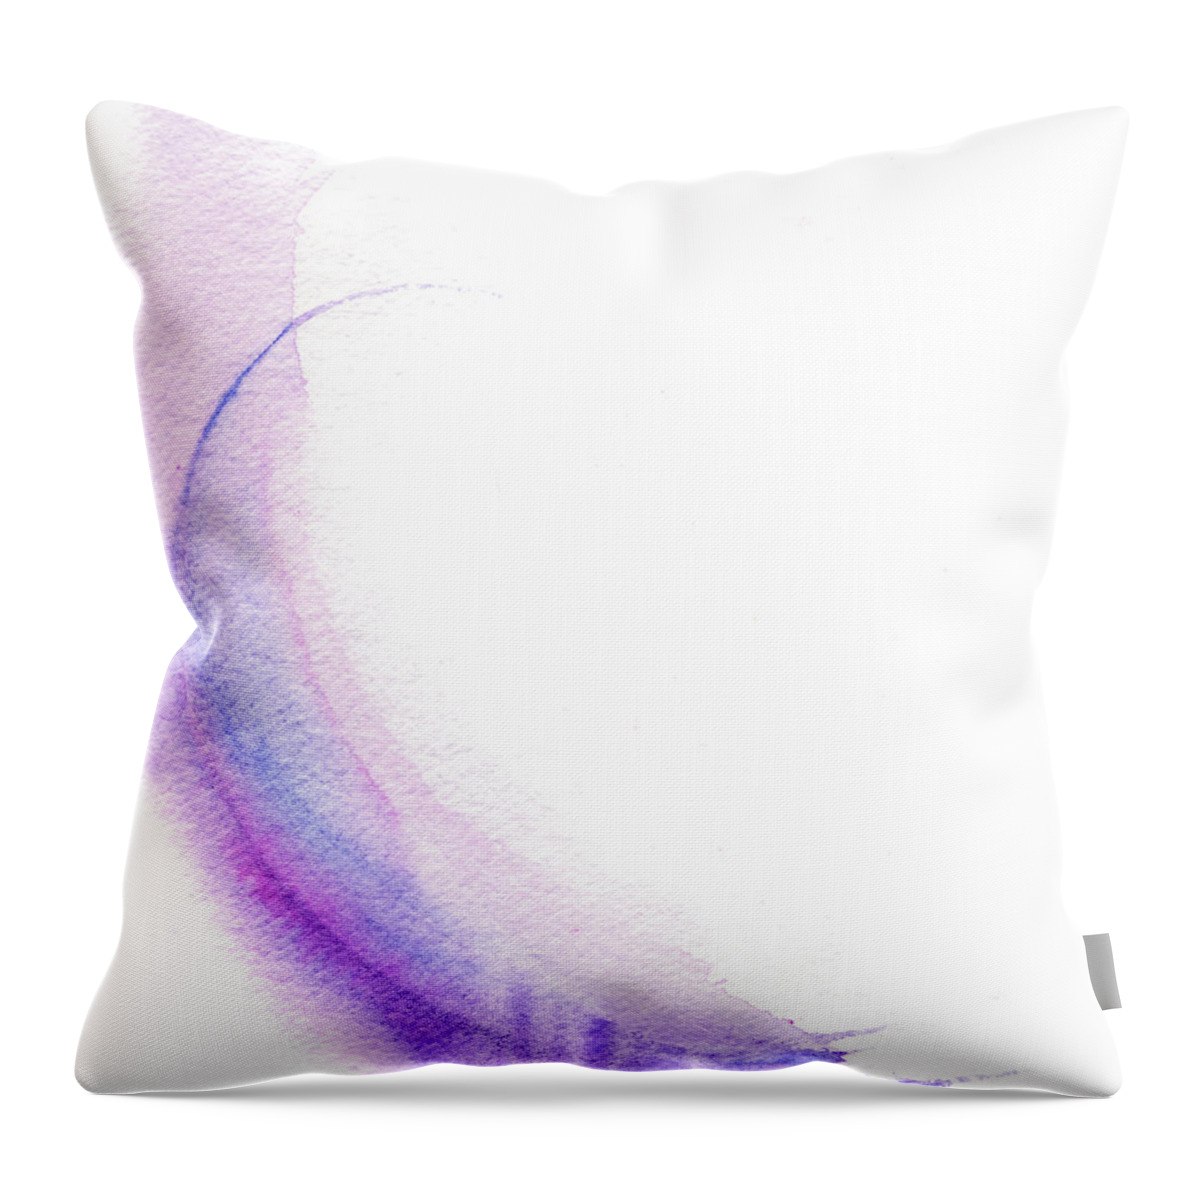 Cool Attitude Throw Pillow featuring the digital art Pretty Purple Pink And Blue Watercolor by Stereohype